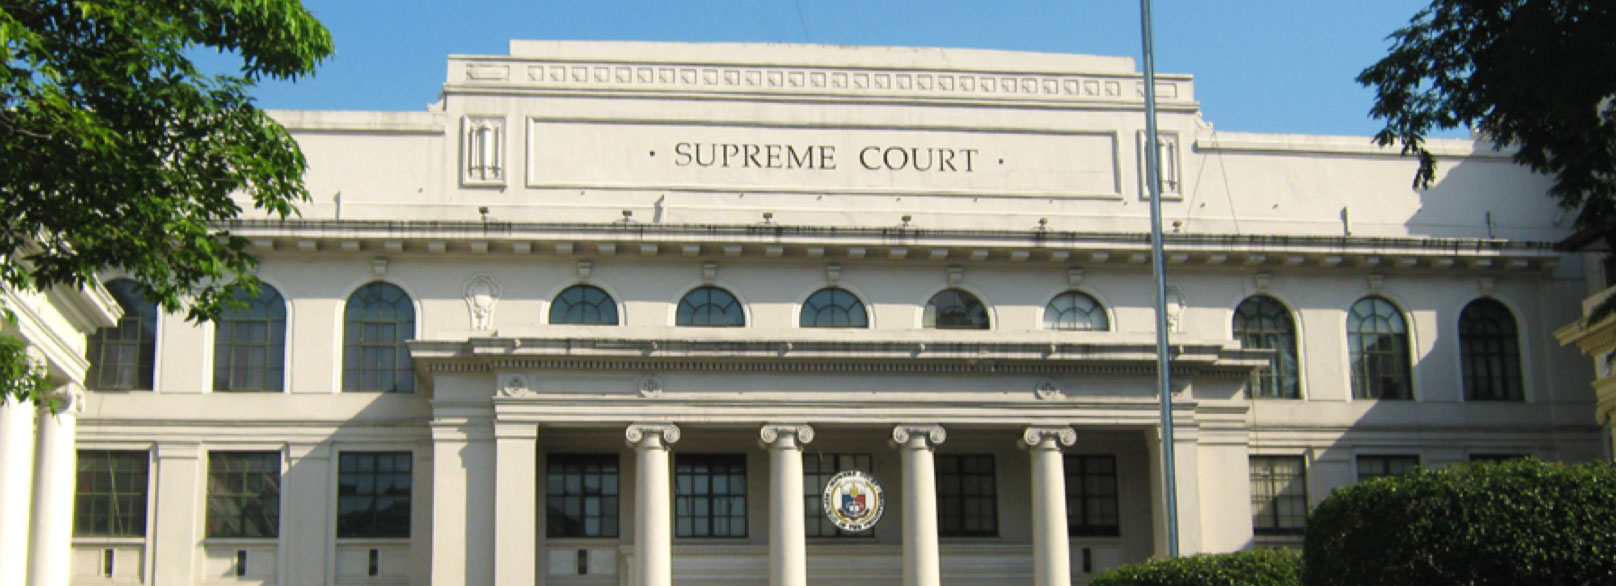 Supreme Court: Only the parties to a construction contract may invoke CIAC jurisdiction